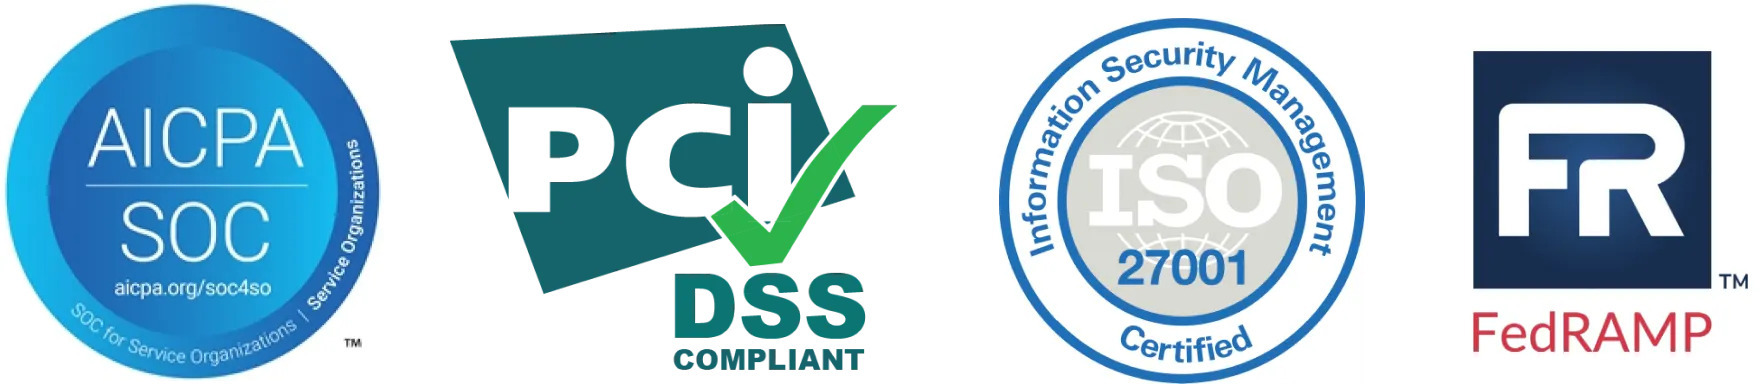 International security and compliance standards logos